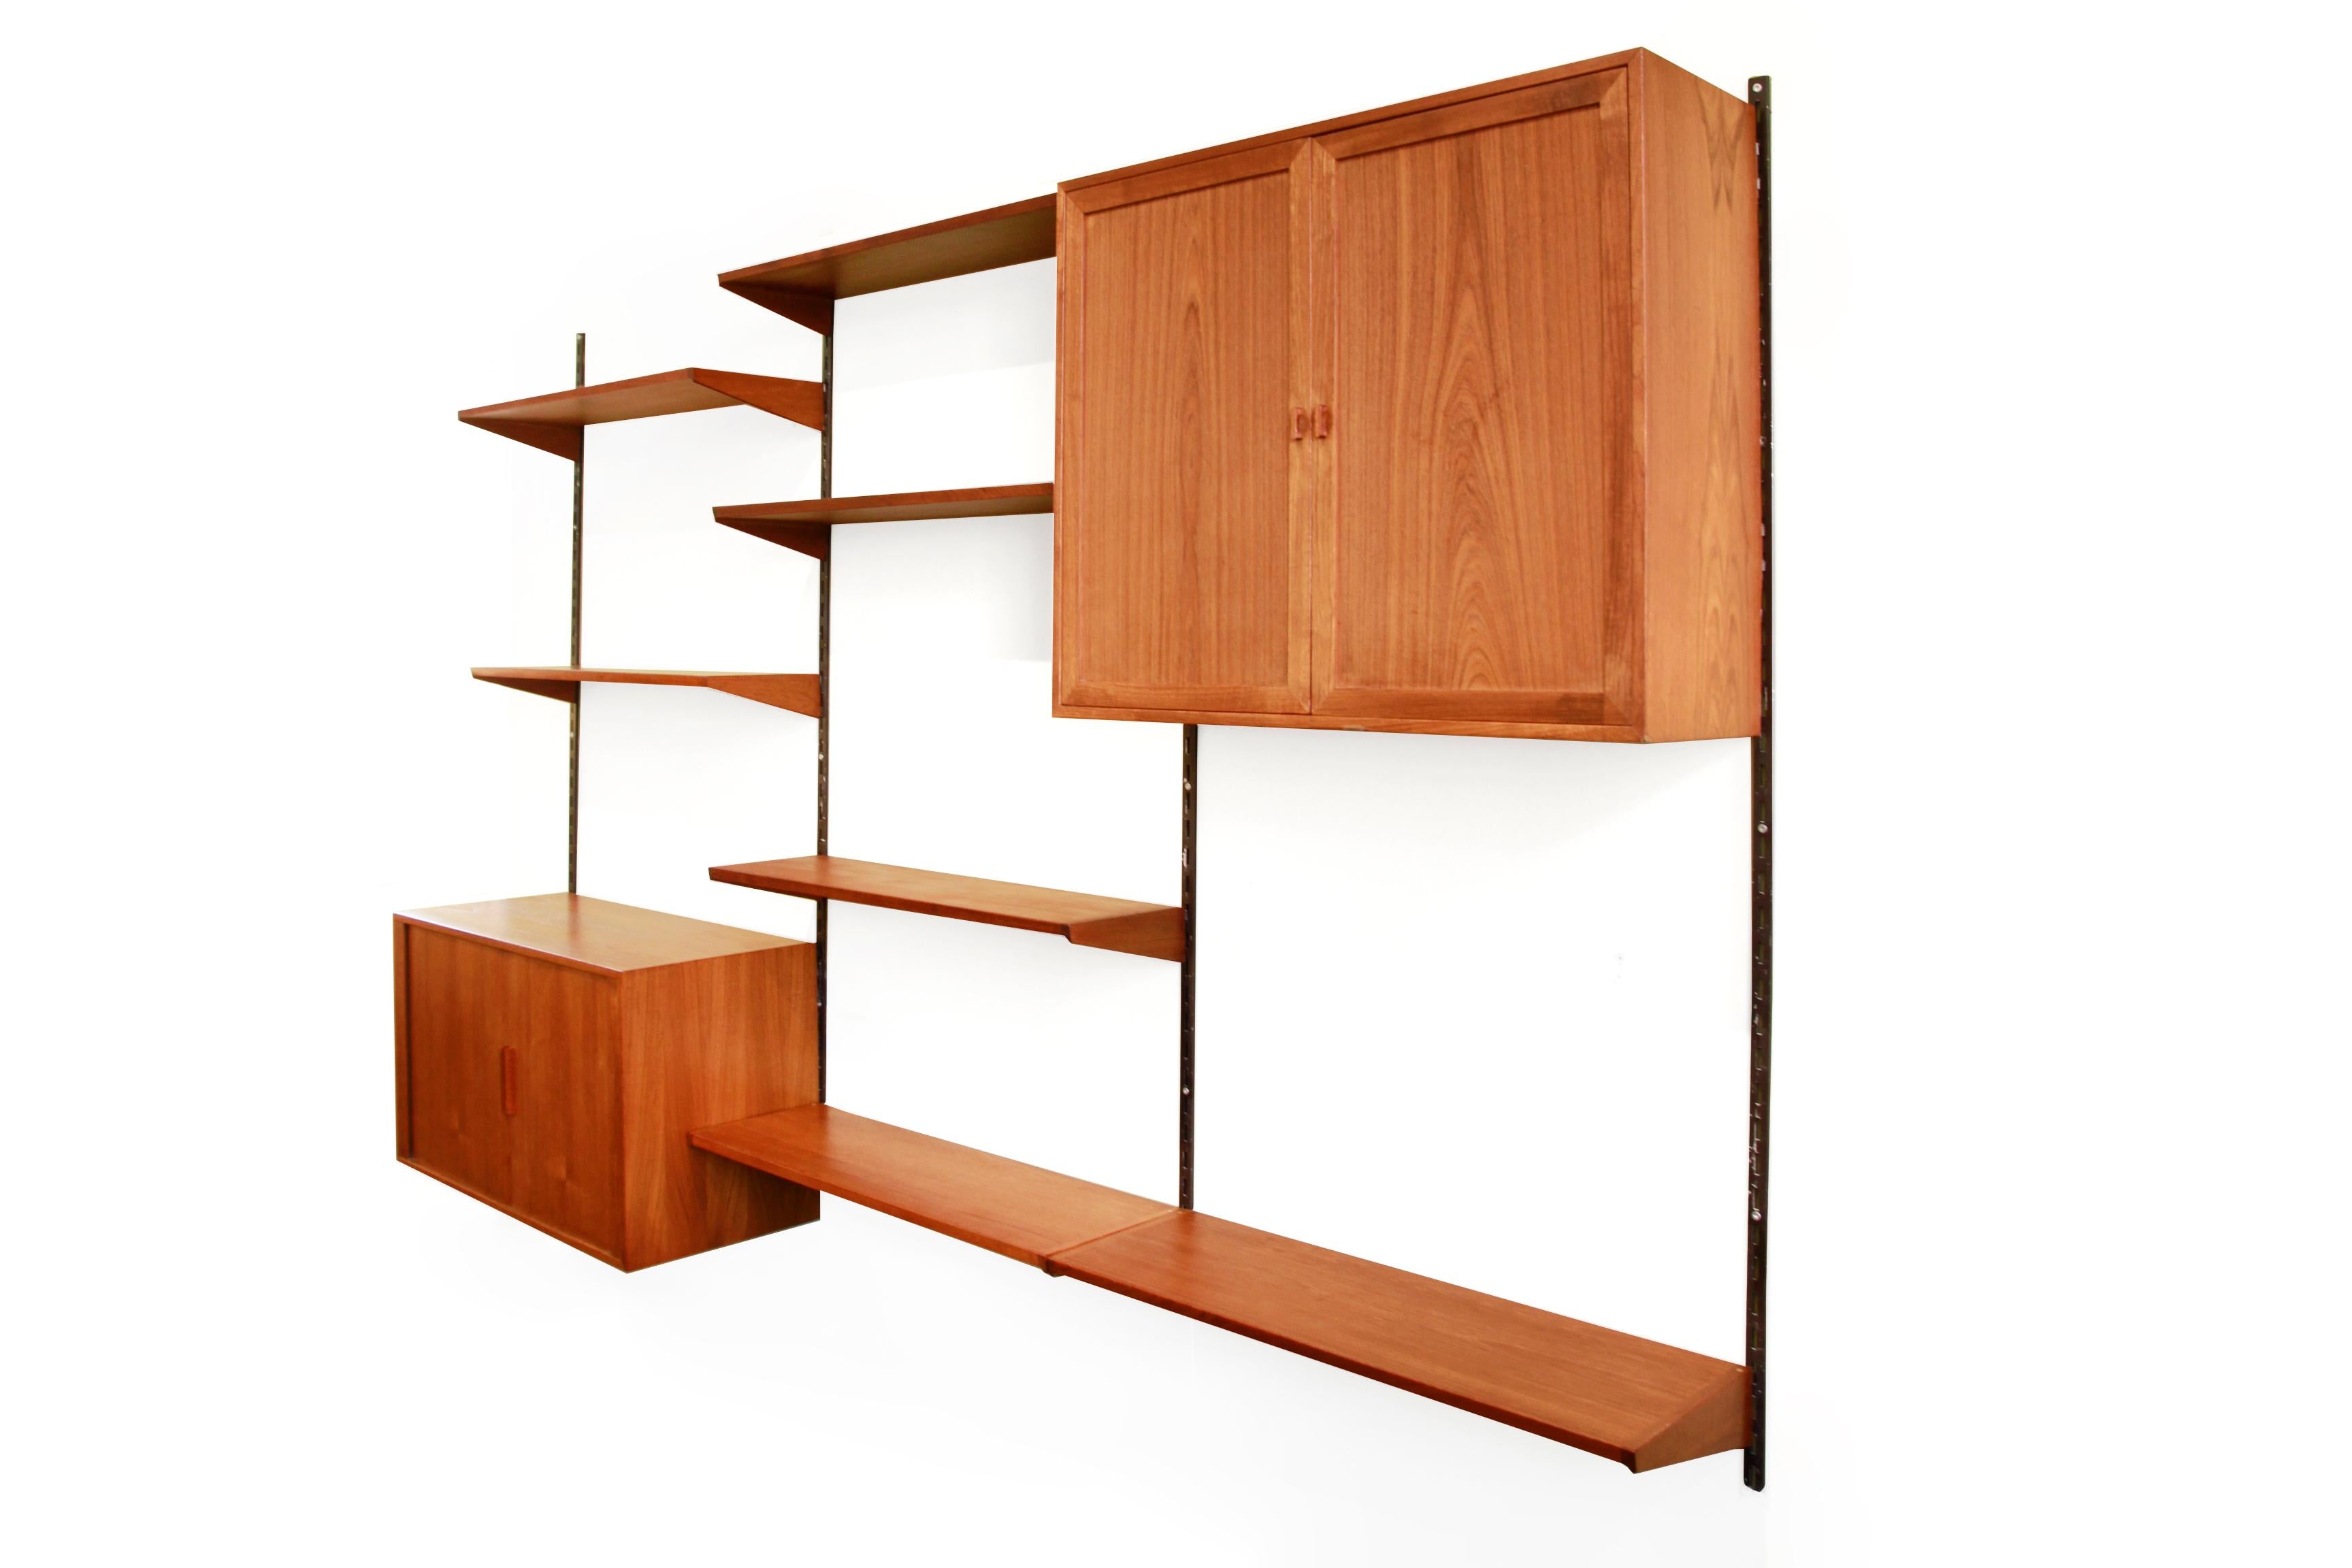 Mid-Century Modern Scandinavian teak wooden wall unit designed by Kai Kristiansen and produced by Feldballes Mobelfabrik, Denmark. Also known as FM Mobler. This shelving unit consists of 4 metal uprights, 7 shelves, a cupboard with two sliding